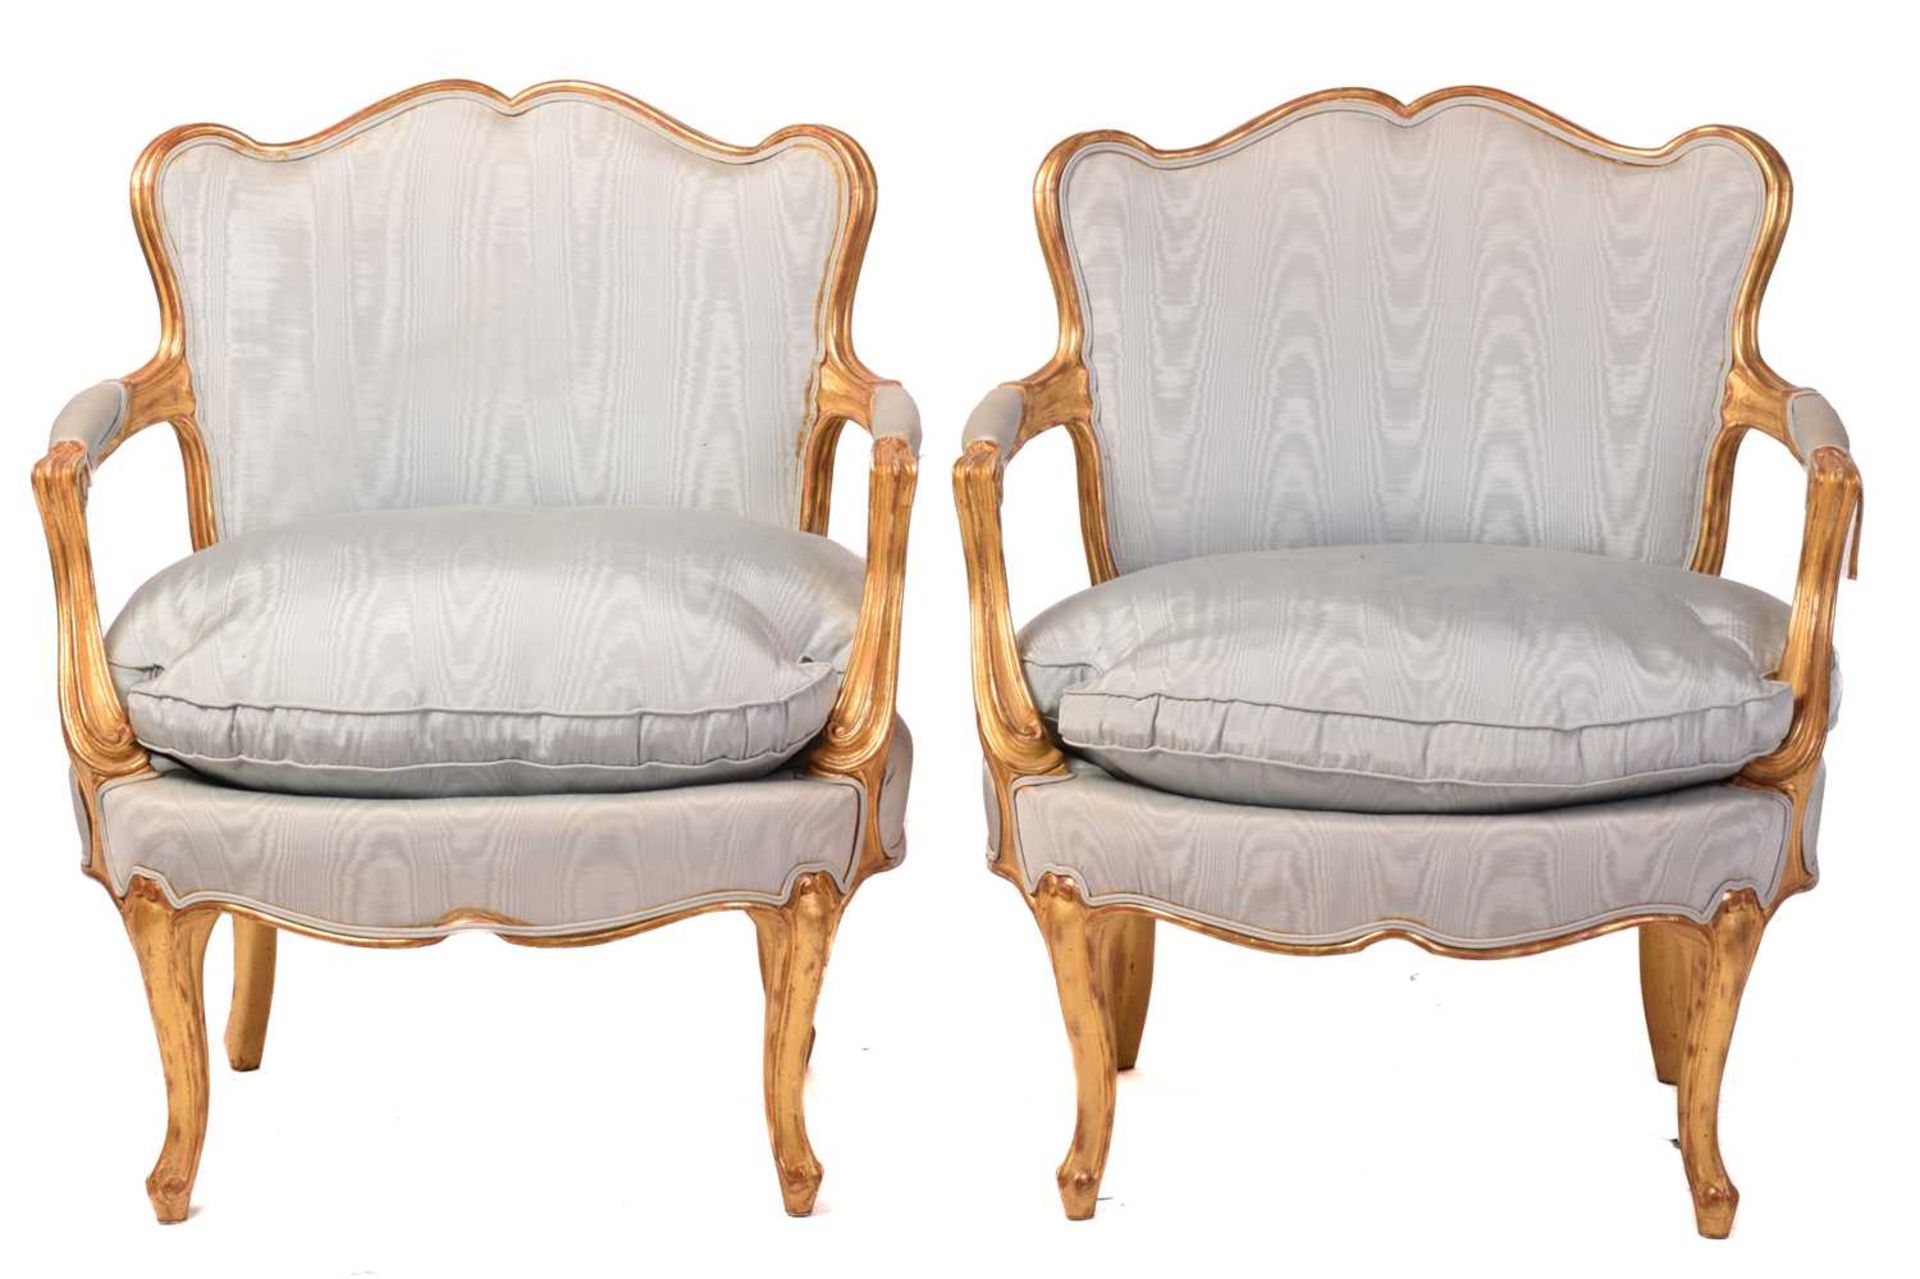 A pair of French Louis XV-style carved wood and gilt gesso fauteuils, 20th century with serpentine - Image 5 of 7